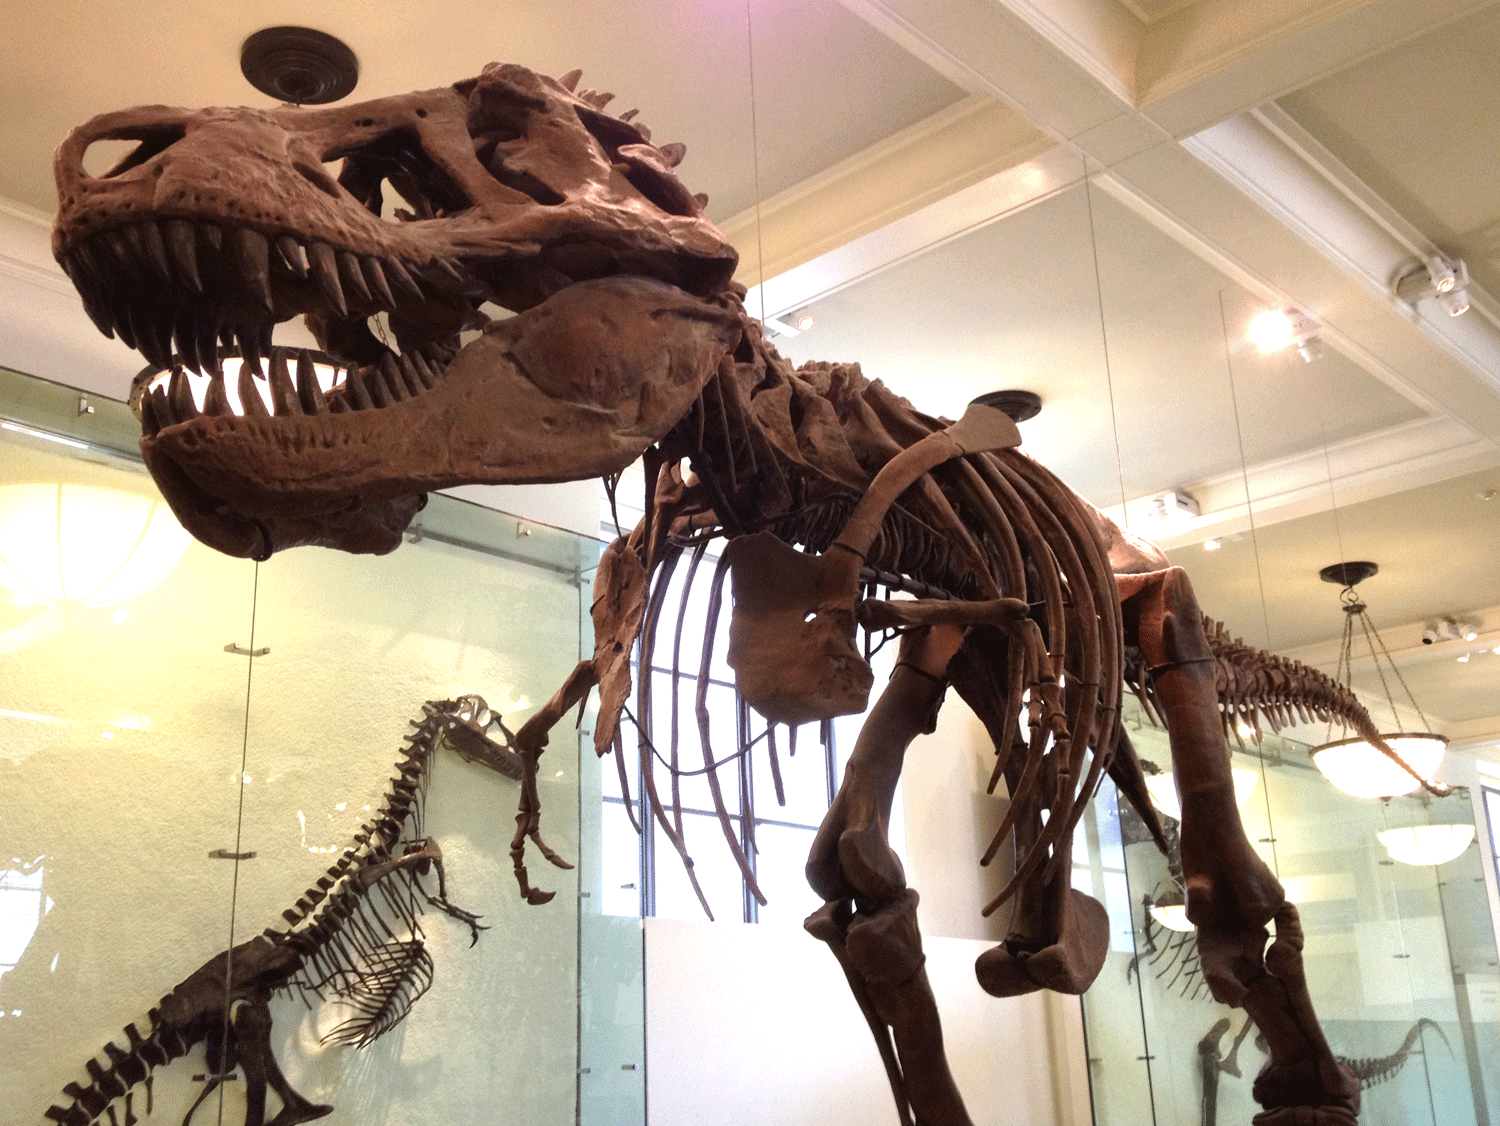 Photograph of a T. rex skeleton at the American Museum of Natural History